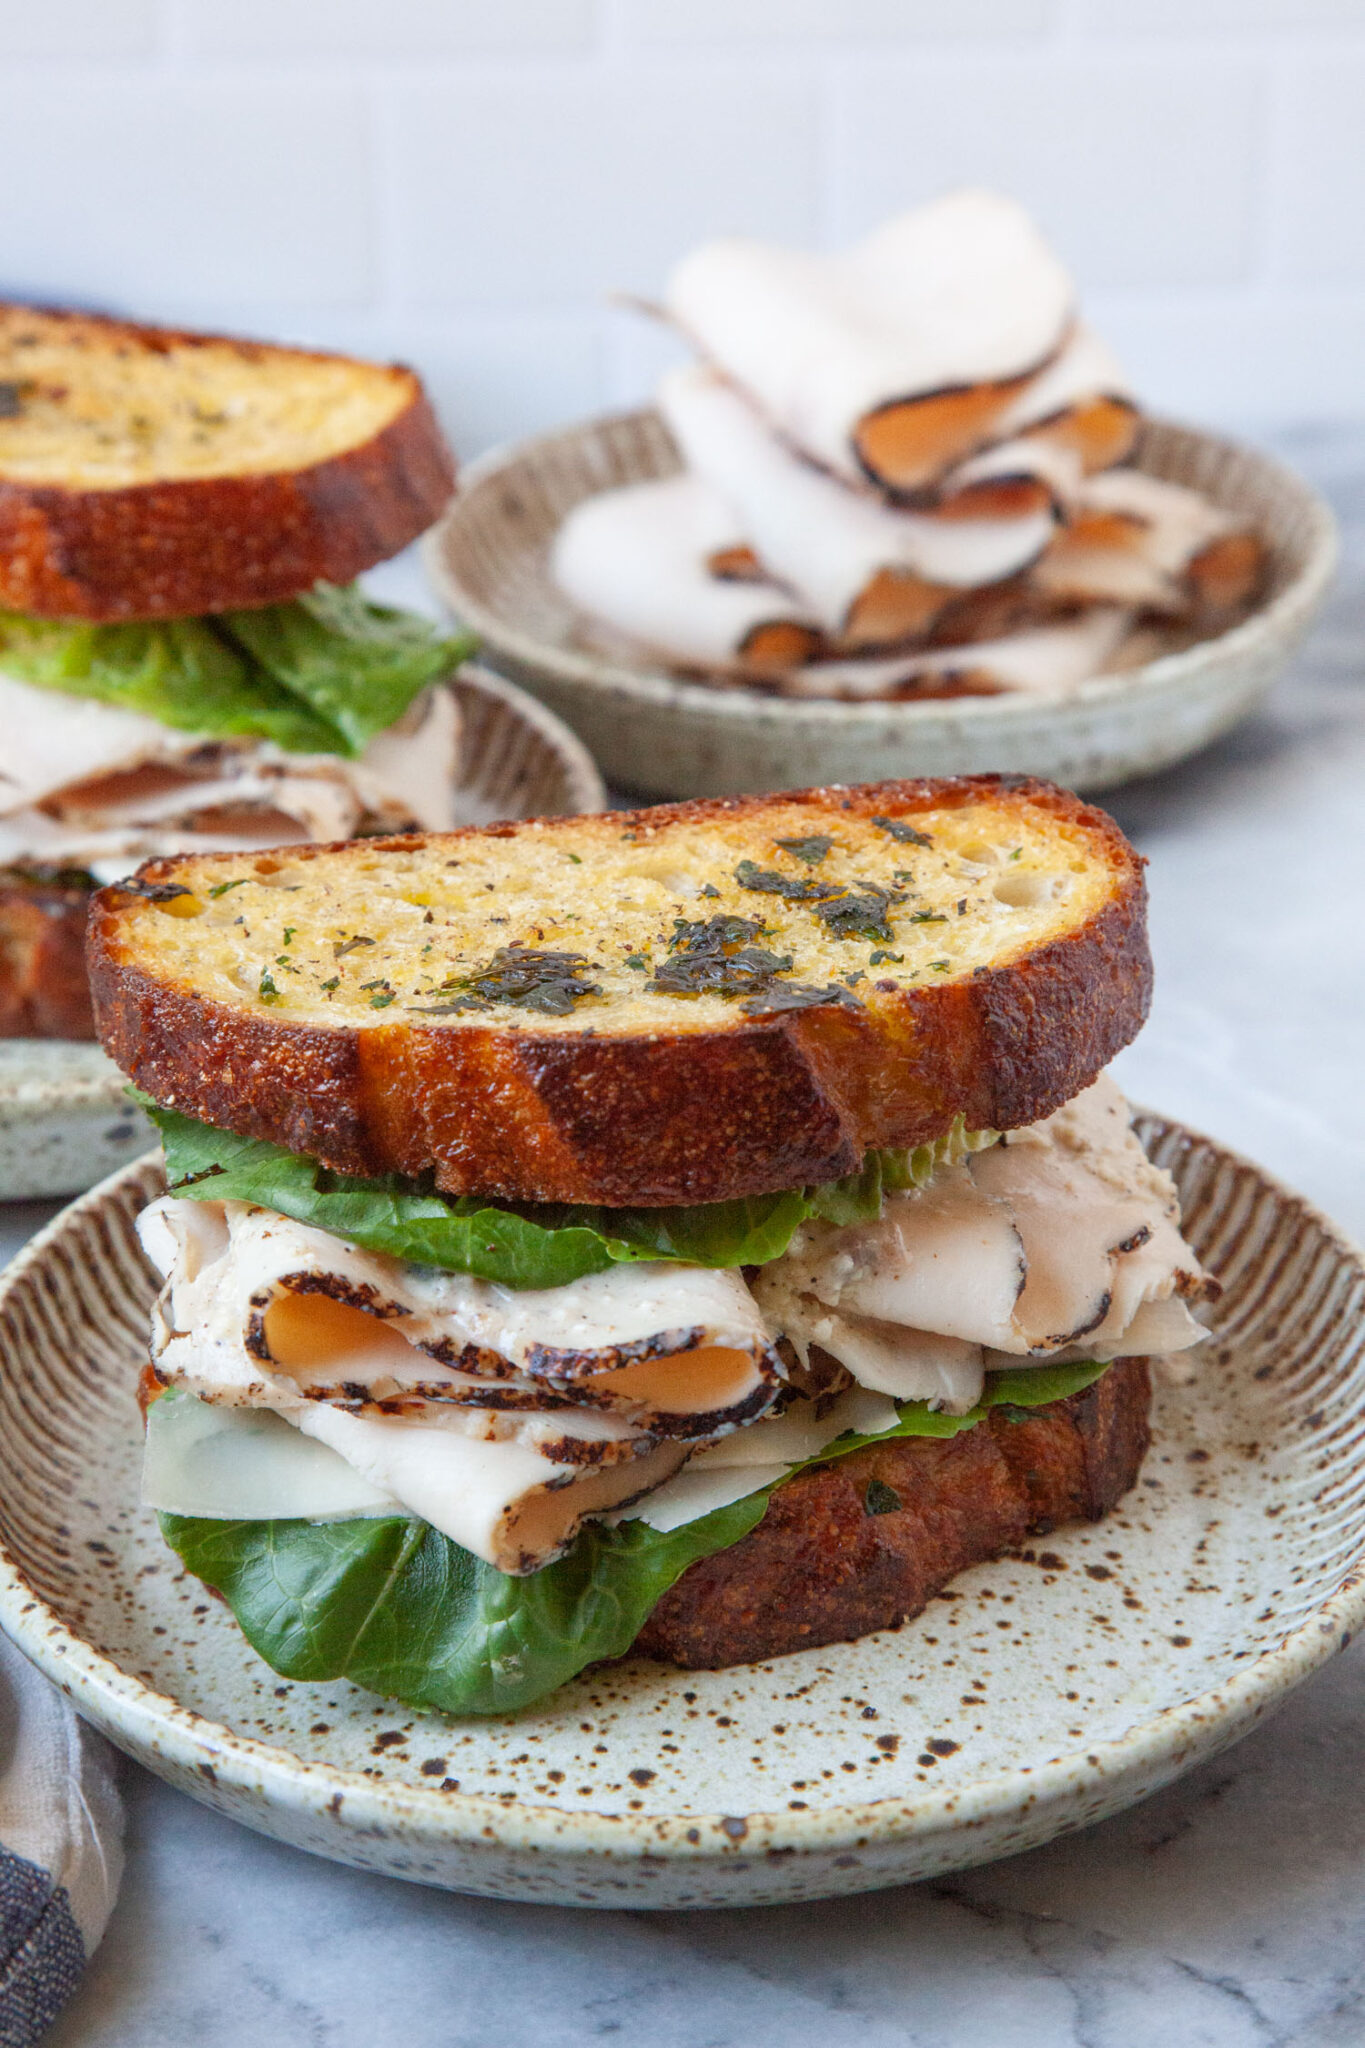 A chicken Caesar Sandwich on a plate, with another sandwich behind it. There is also a plate of sliced deli chicken behind both sandwiches.